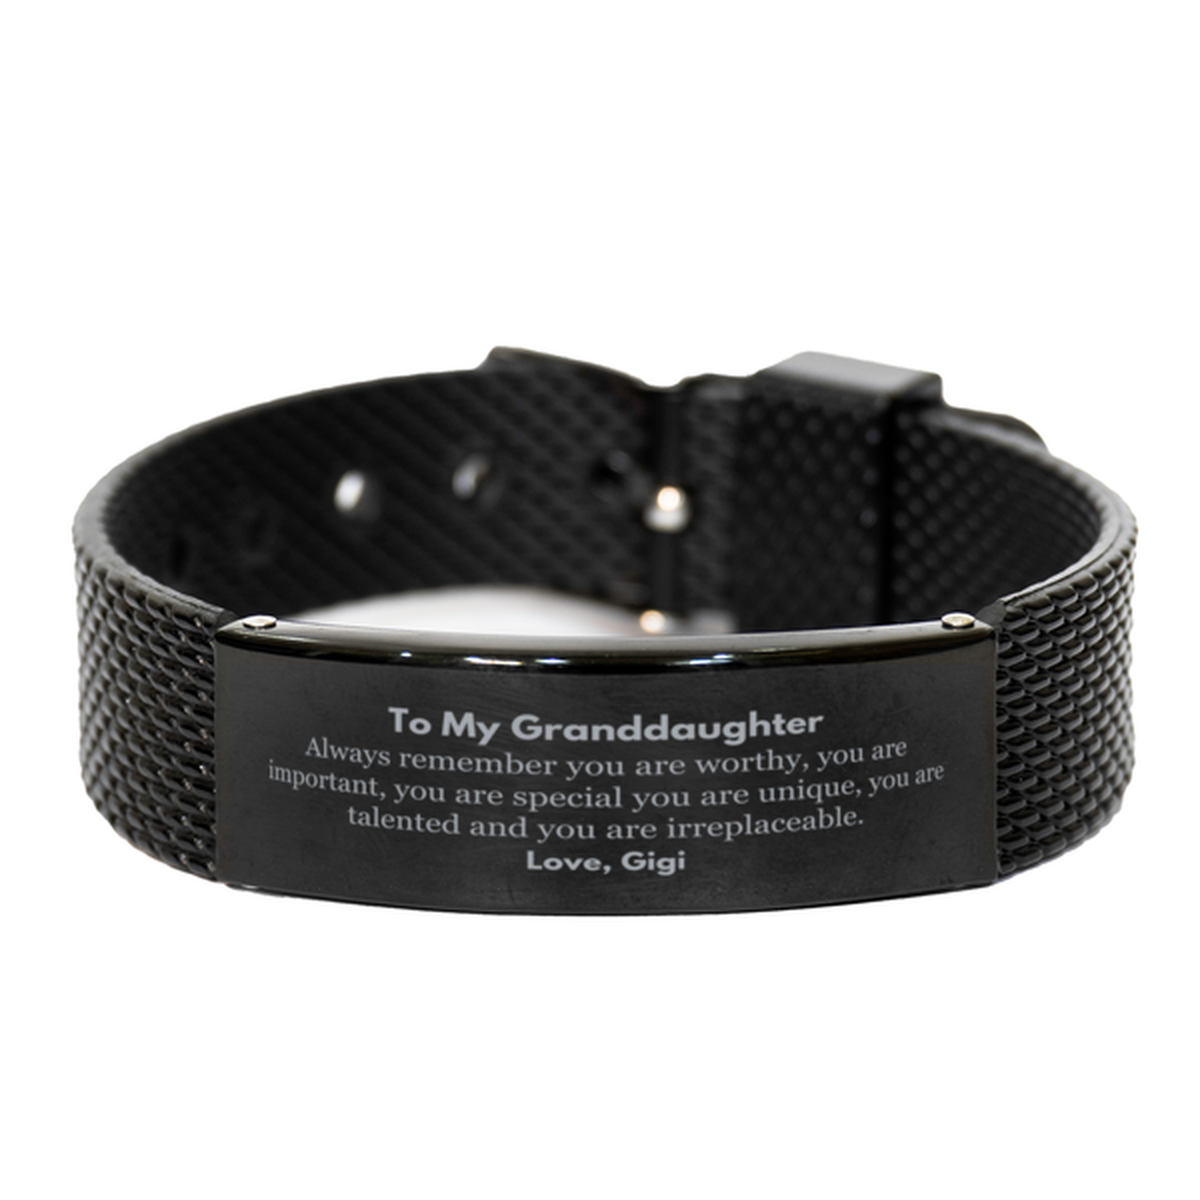 Granddaughter Birthday Gifts from Gigi, Inspirational Black Shark Mesh Bracelet for Granddaughter Christmas Graduation Gifts for Granddaughter Always remember you are worthy, you are important. Love, Gigi